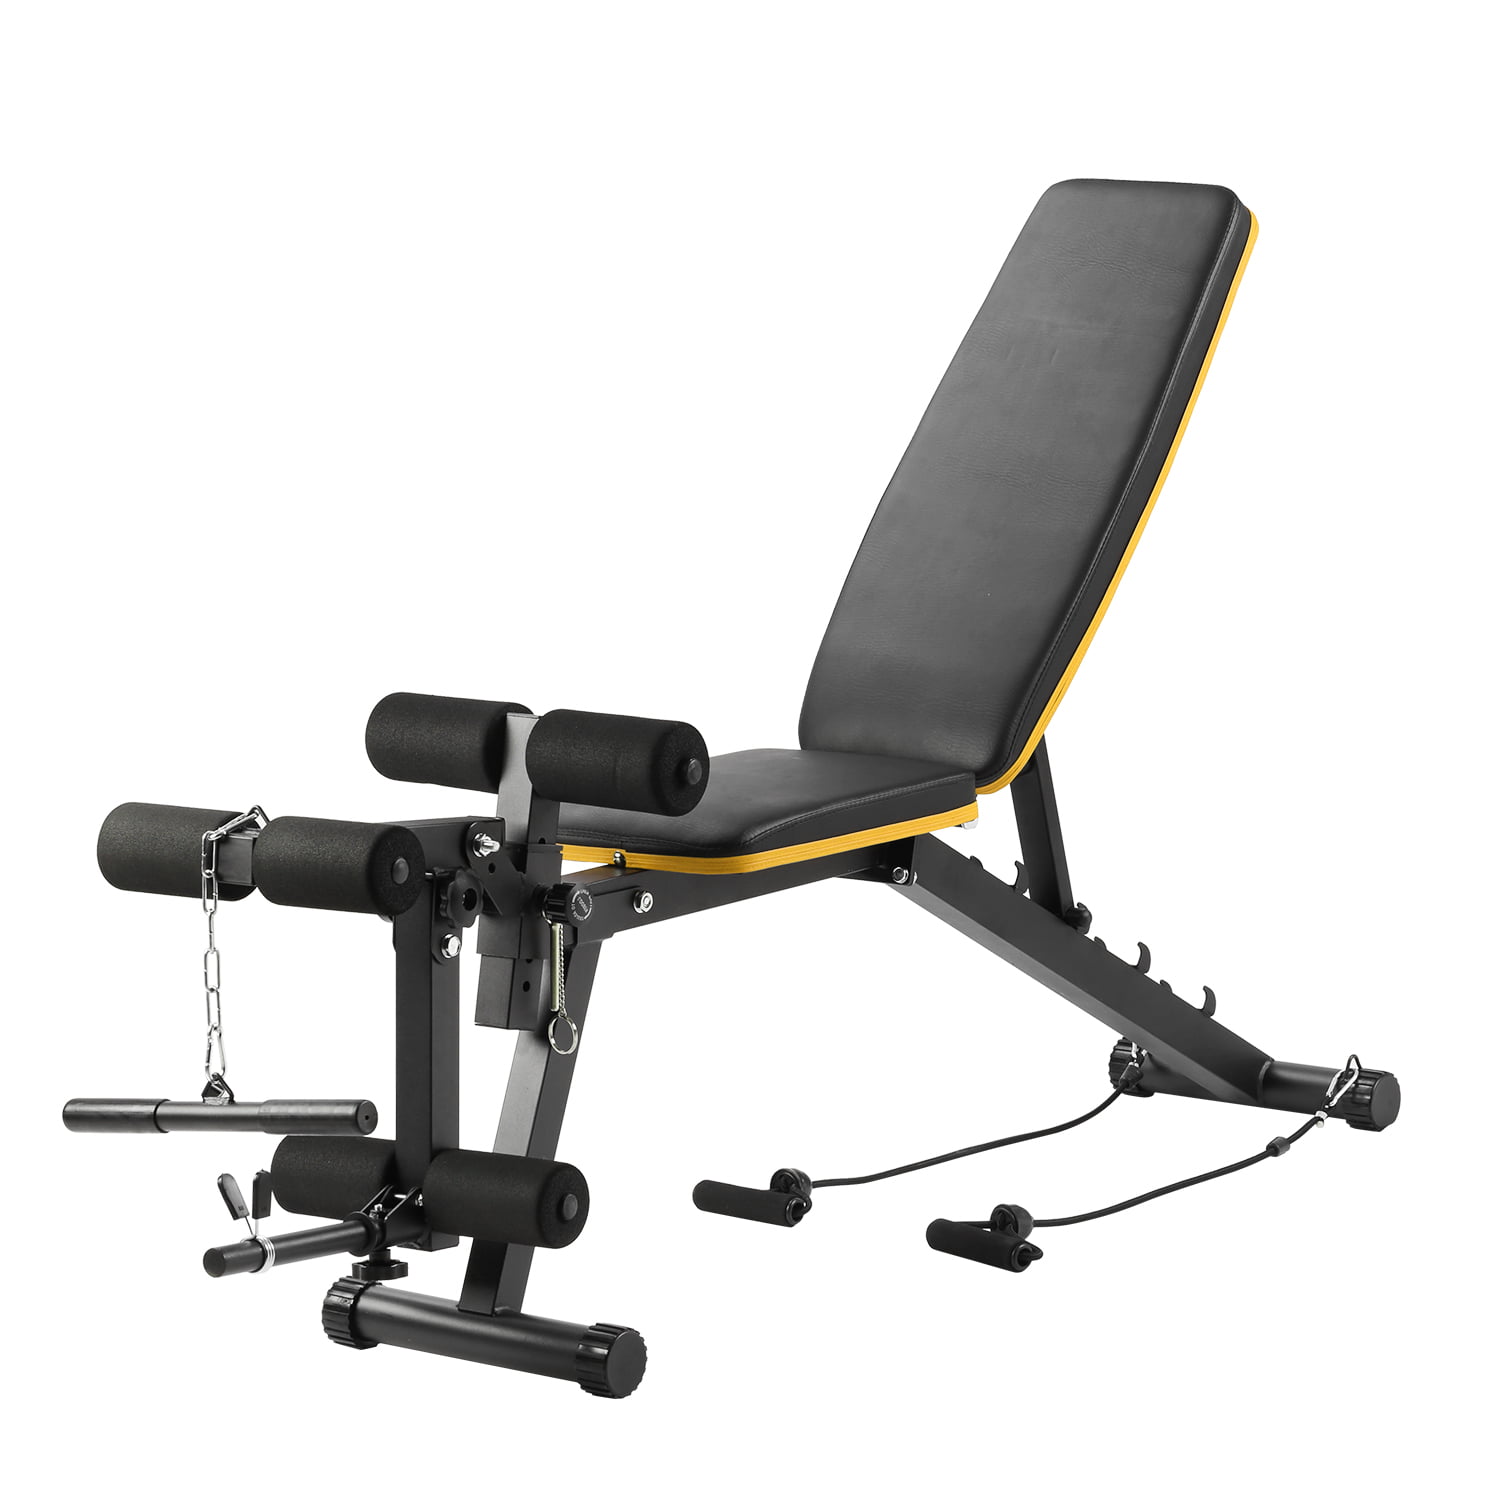 HulkFit Adjustable Utility Weight Bench for Incline, Decline, and Flat  Exercise - Walmart.com